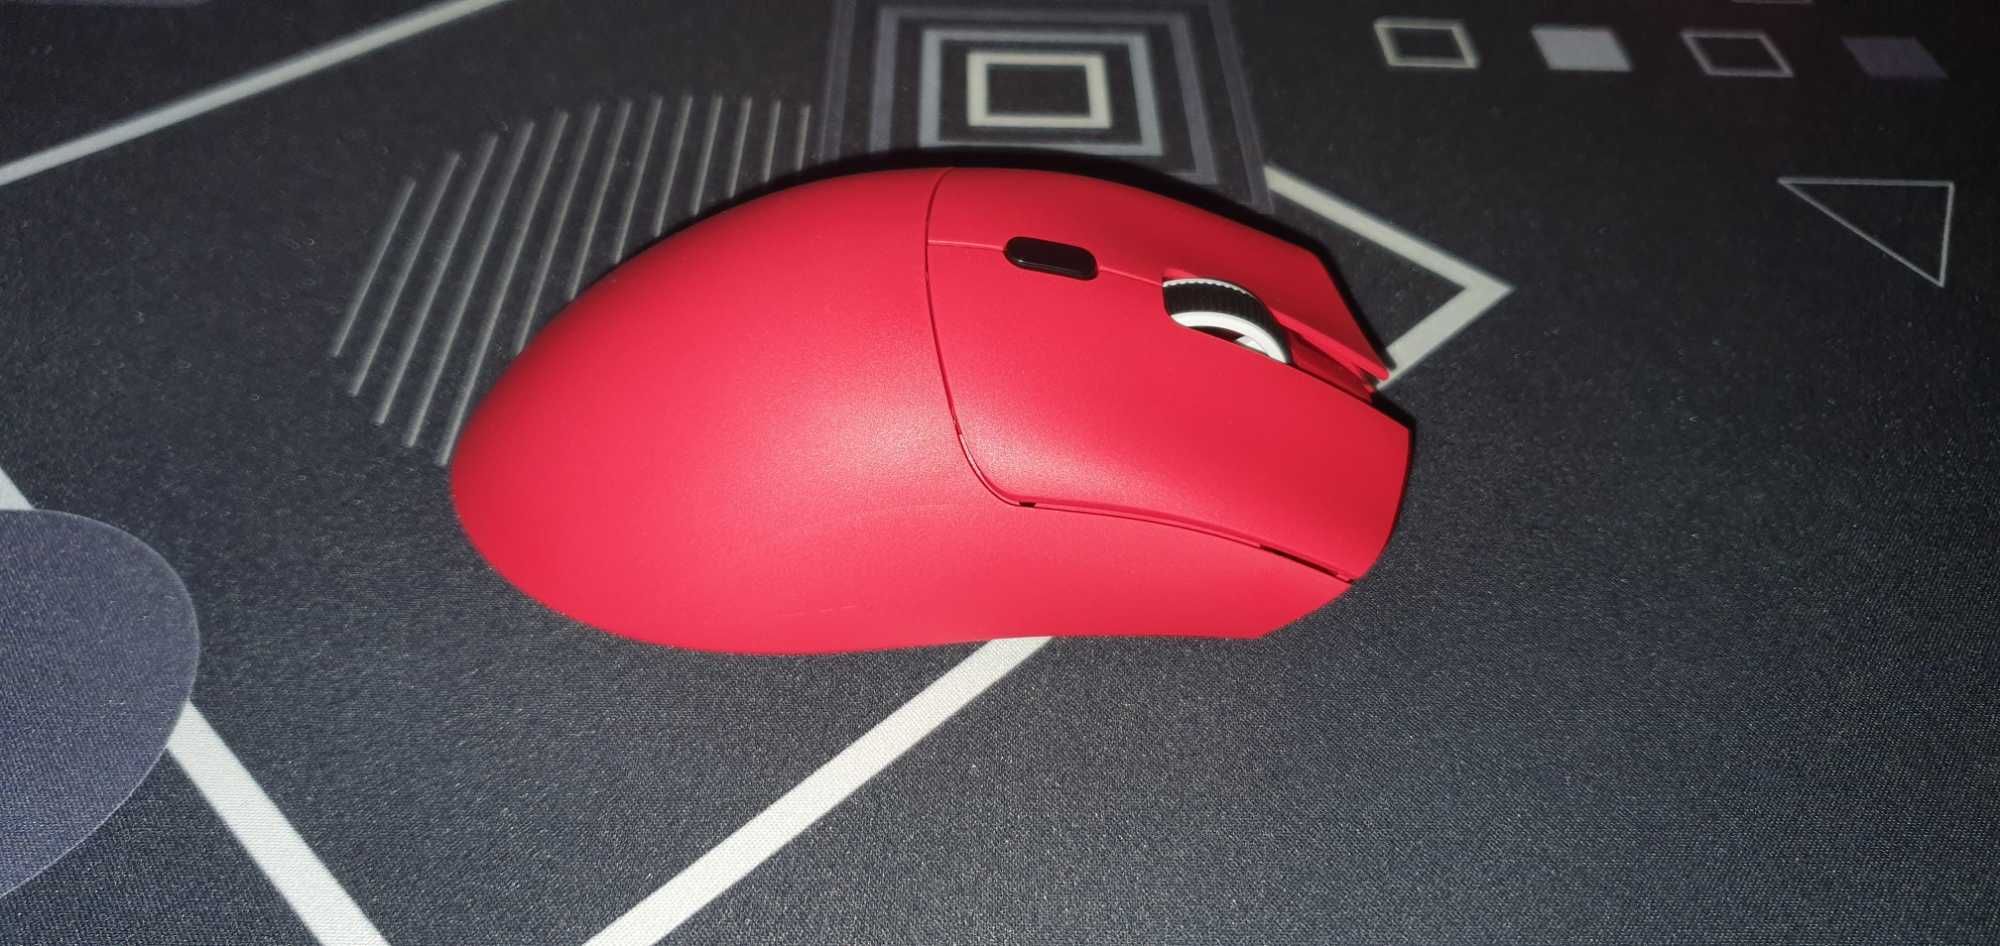 Attack Shark-Mouse R1